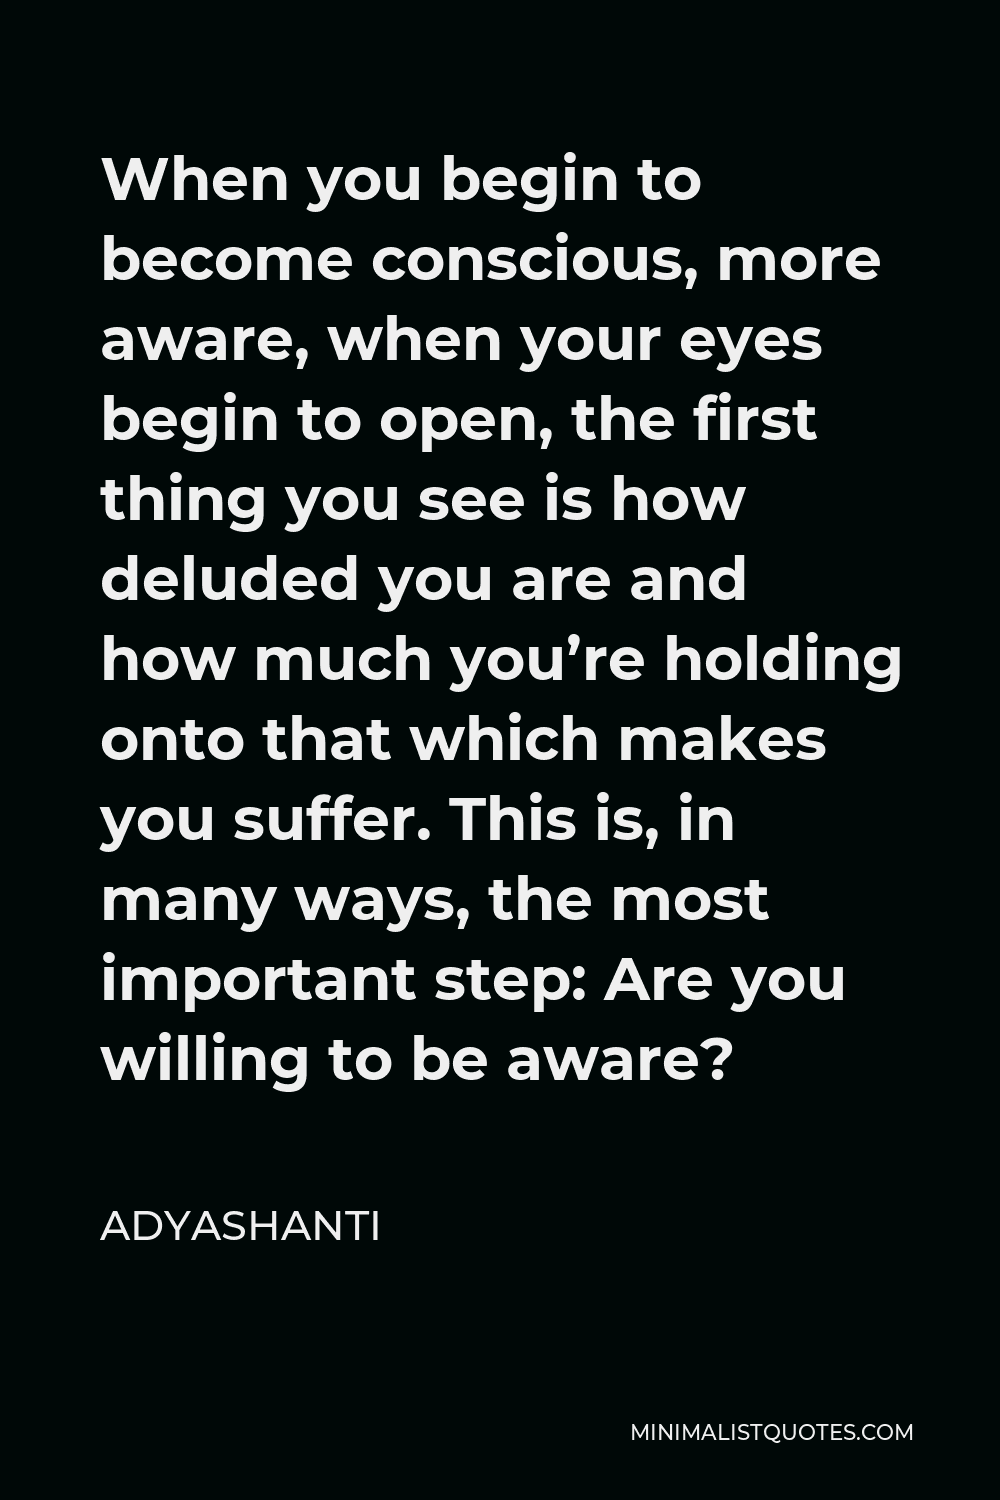 Adyashanti Quote - When you begin to become conscious, more aware, when your eyes begin to open, the first thing you see is how deluded you are and how much you’re holding onto that which makes you suffer. This is, in many ways, the most important step: Are you willing to be aware?